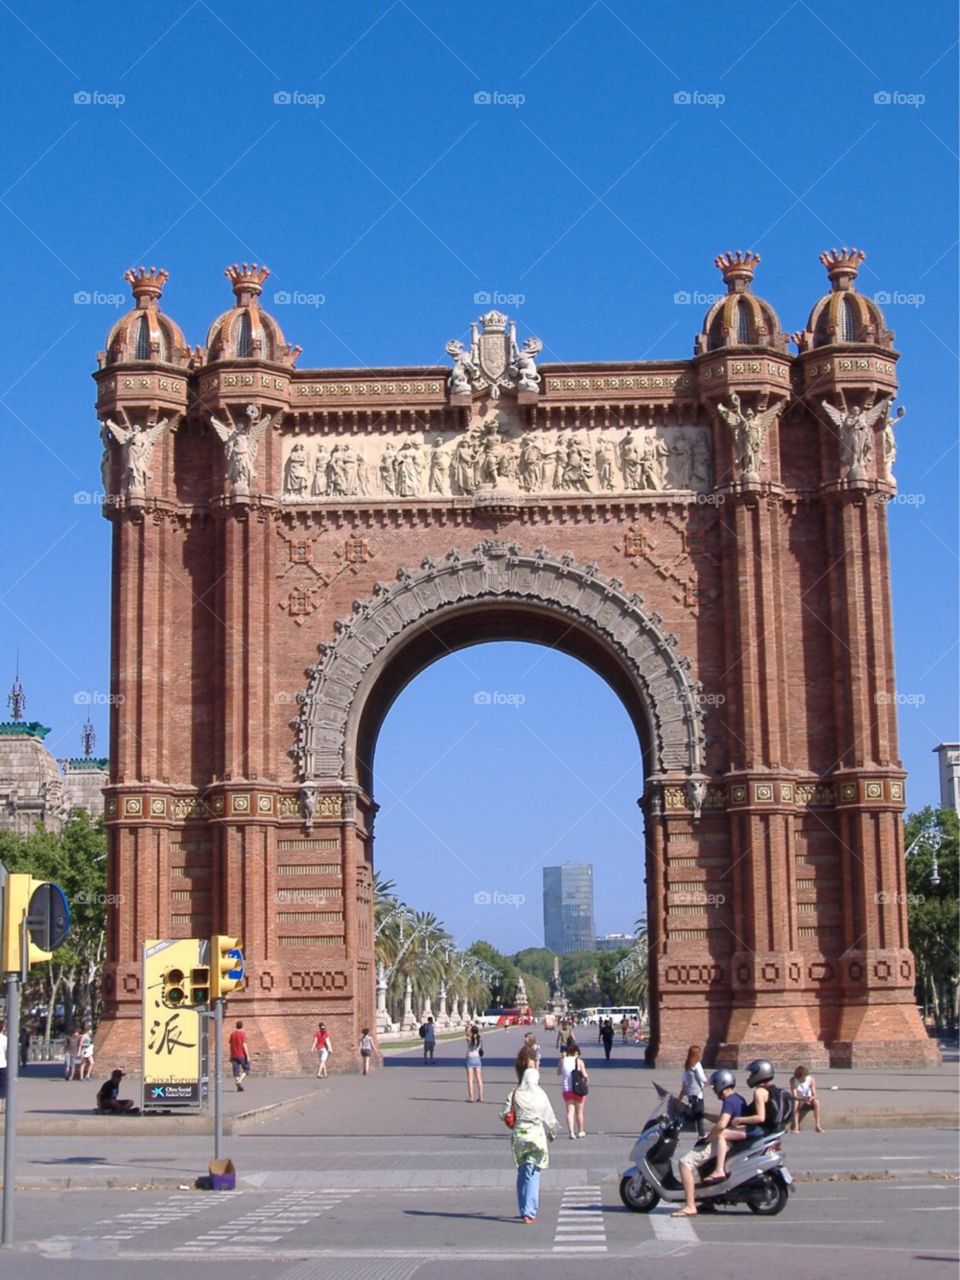 Archway in Barcelona, Spain. 